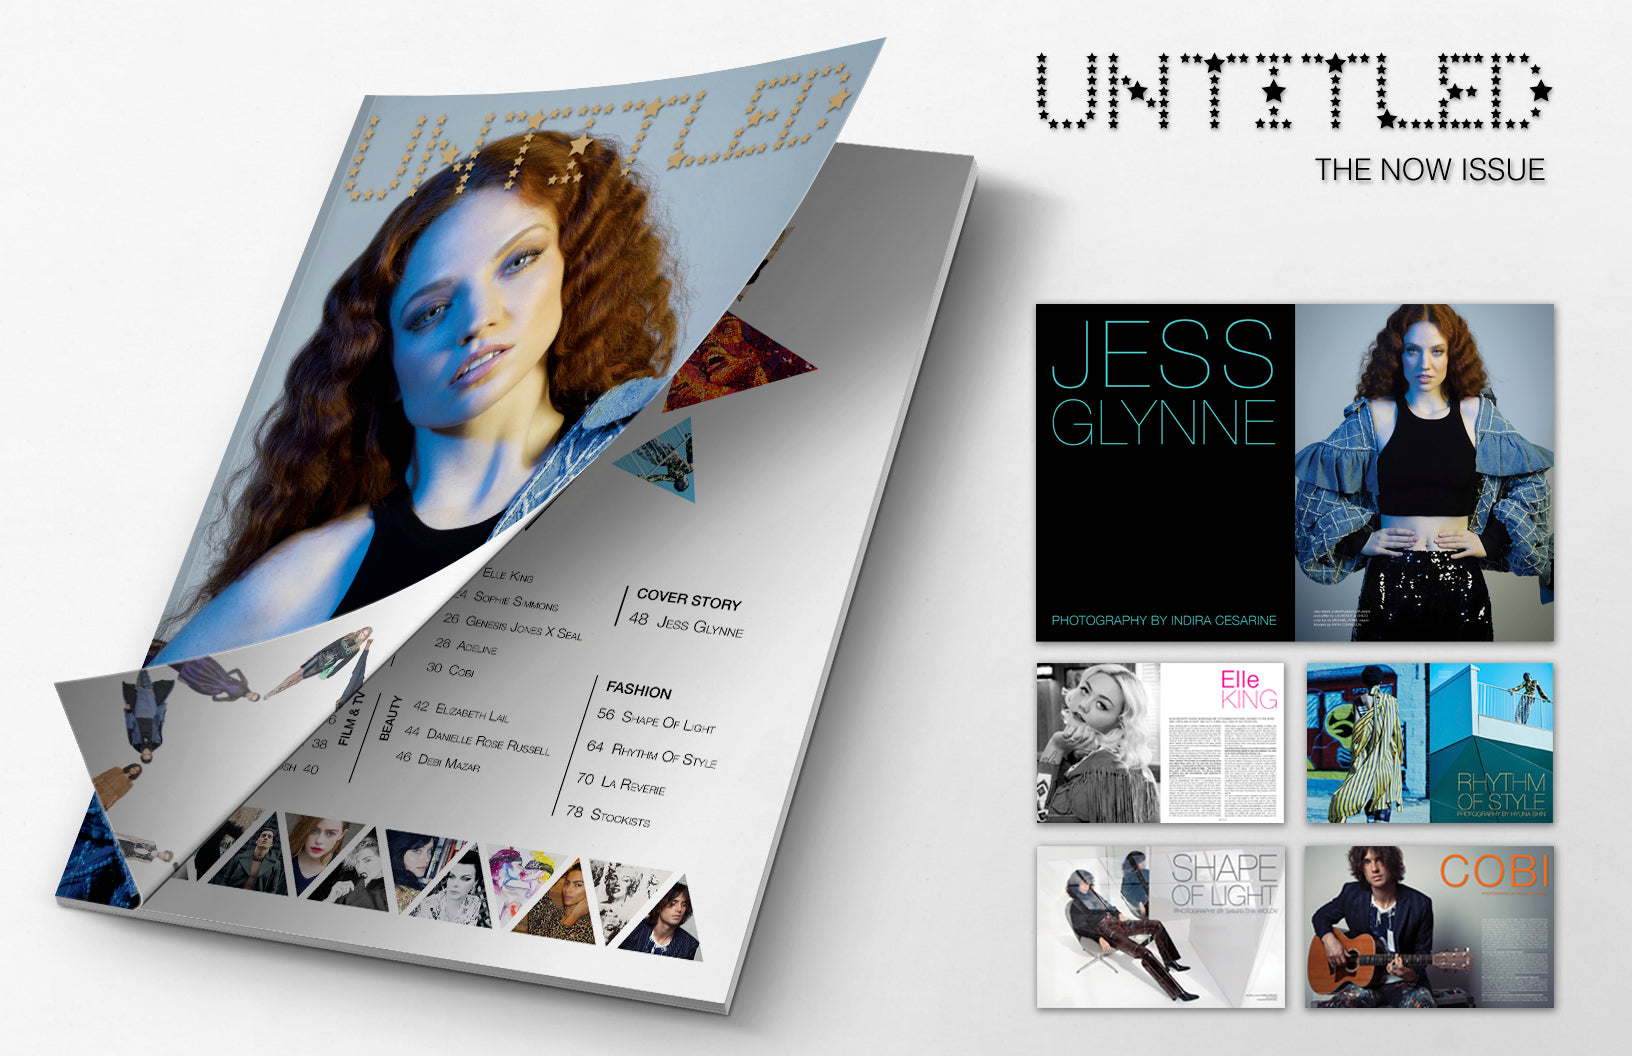 THE UNTITLED MAGAZINE NOW ISSUE - JESS GLYNNE COVER - DIGITAL EDITION